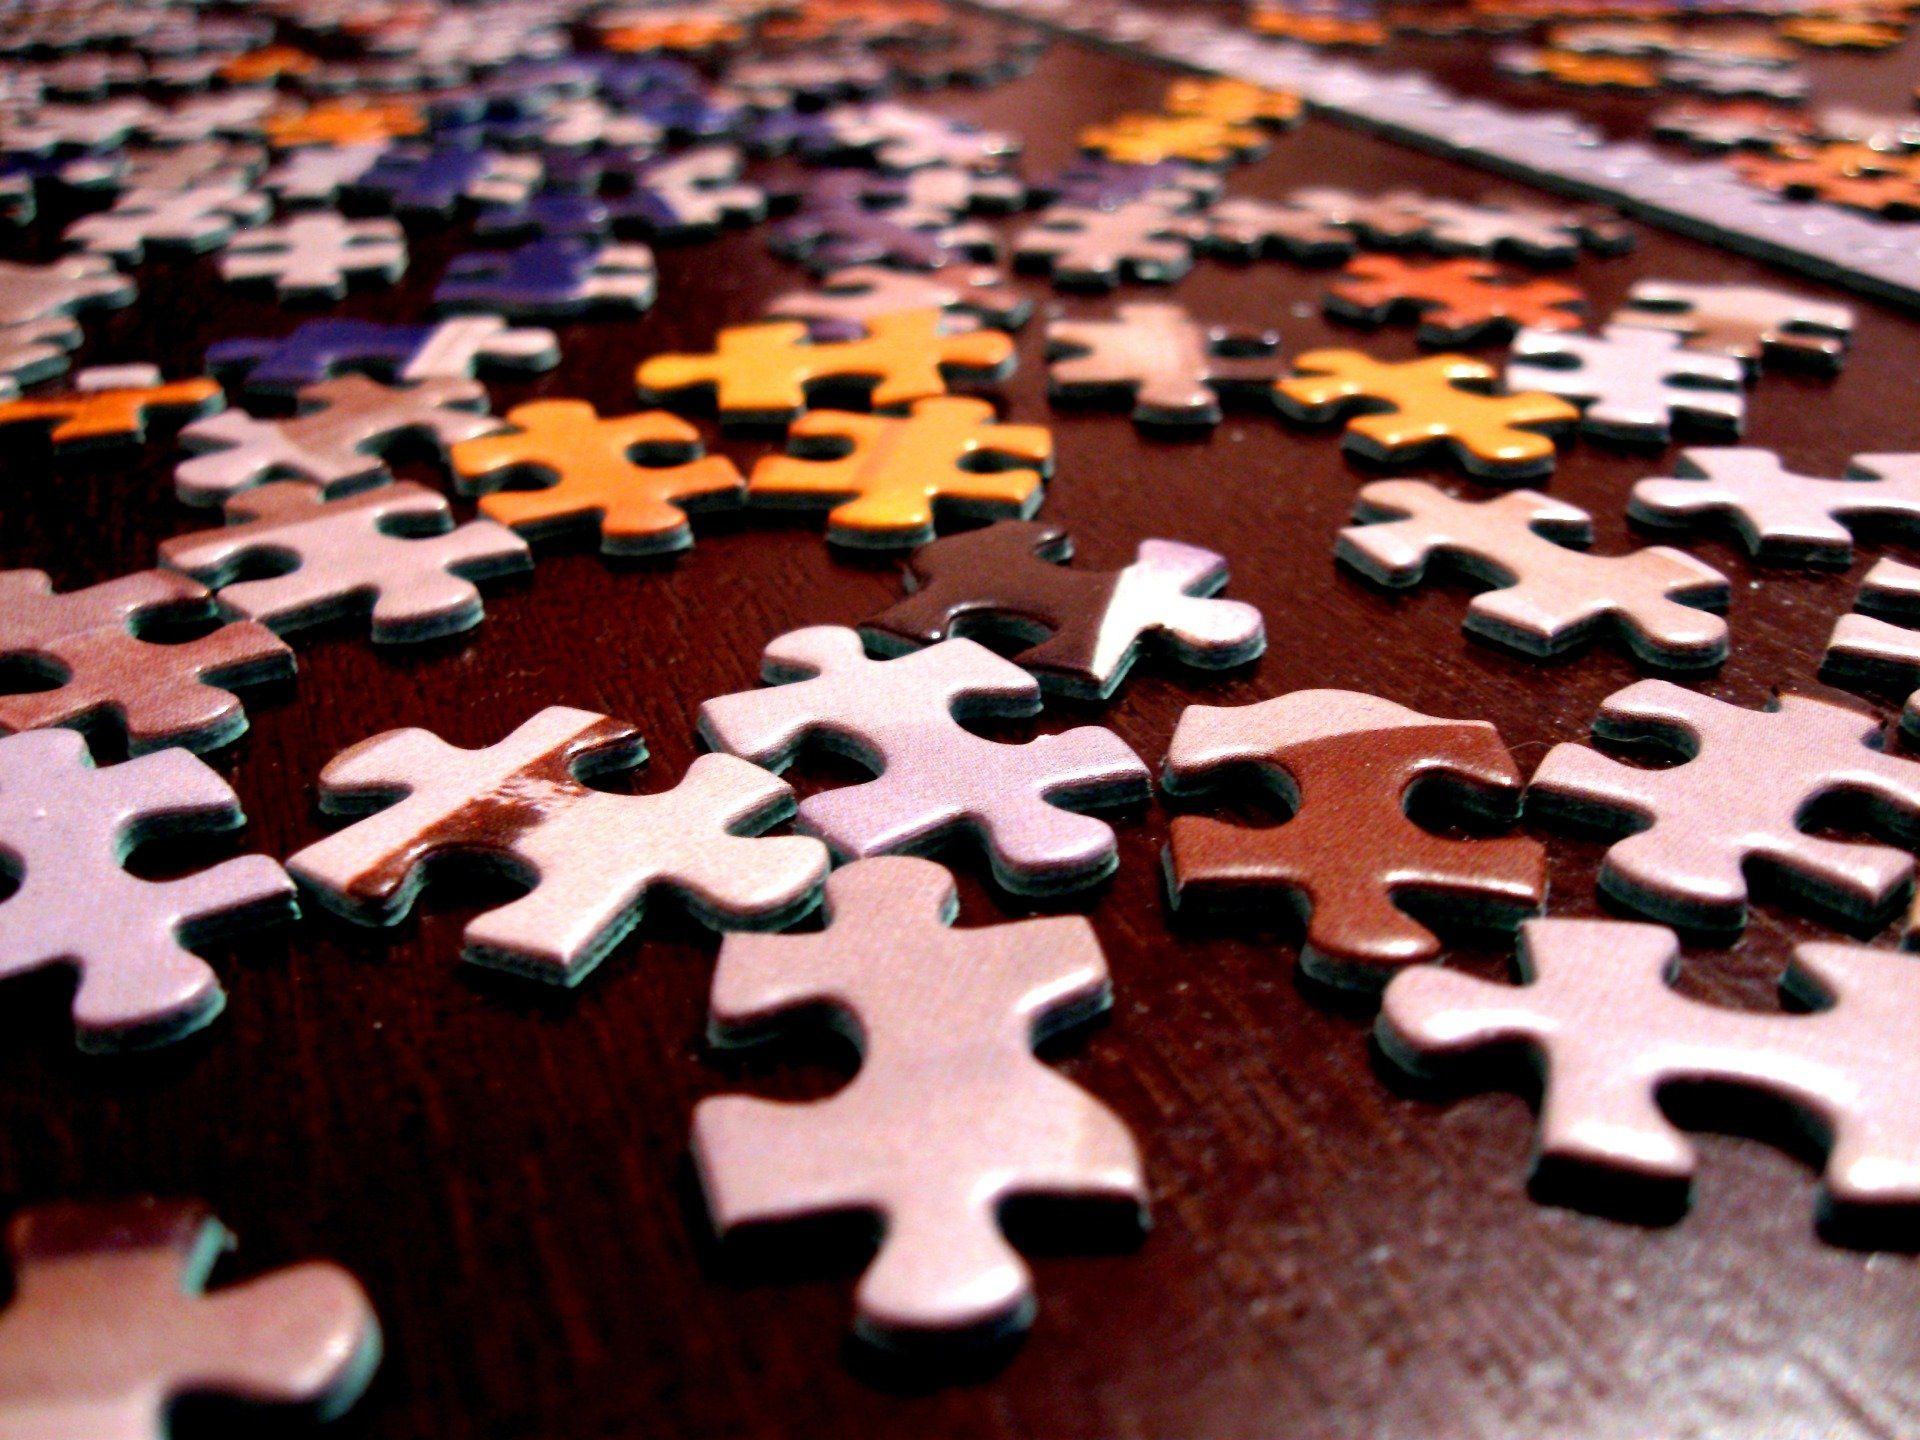 A close up of a puzzle piece on a table.